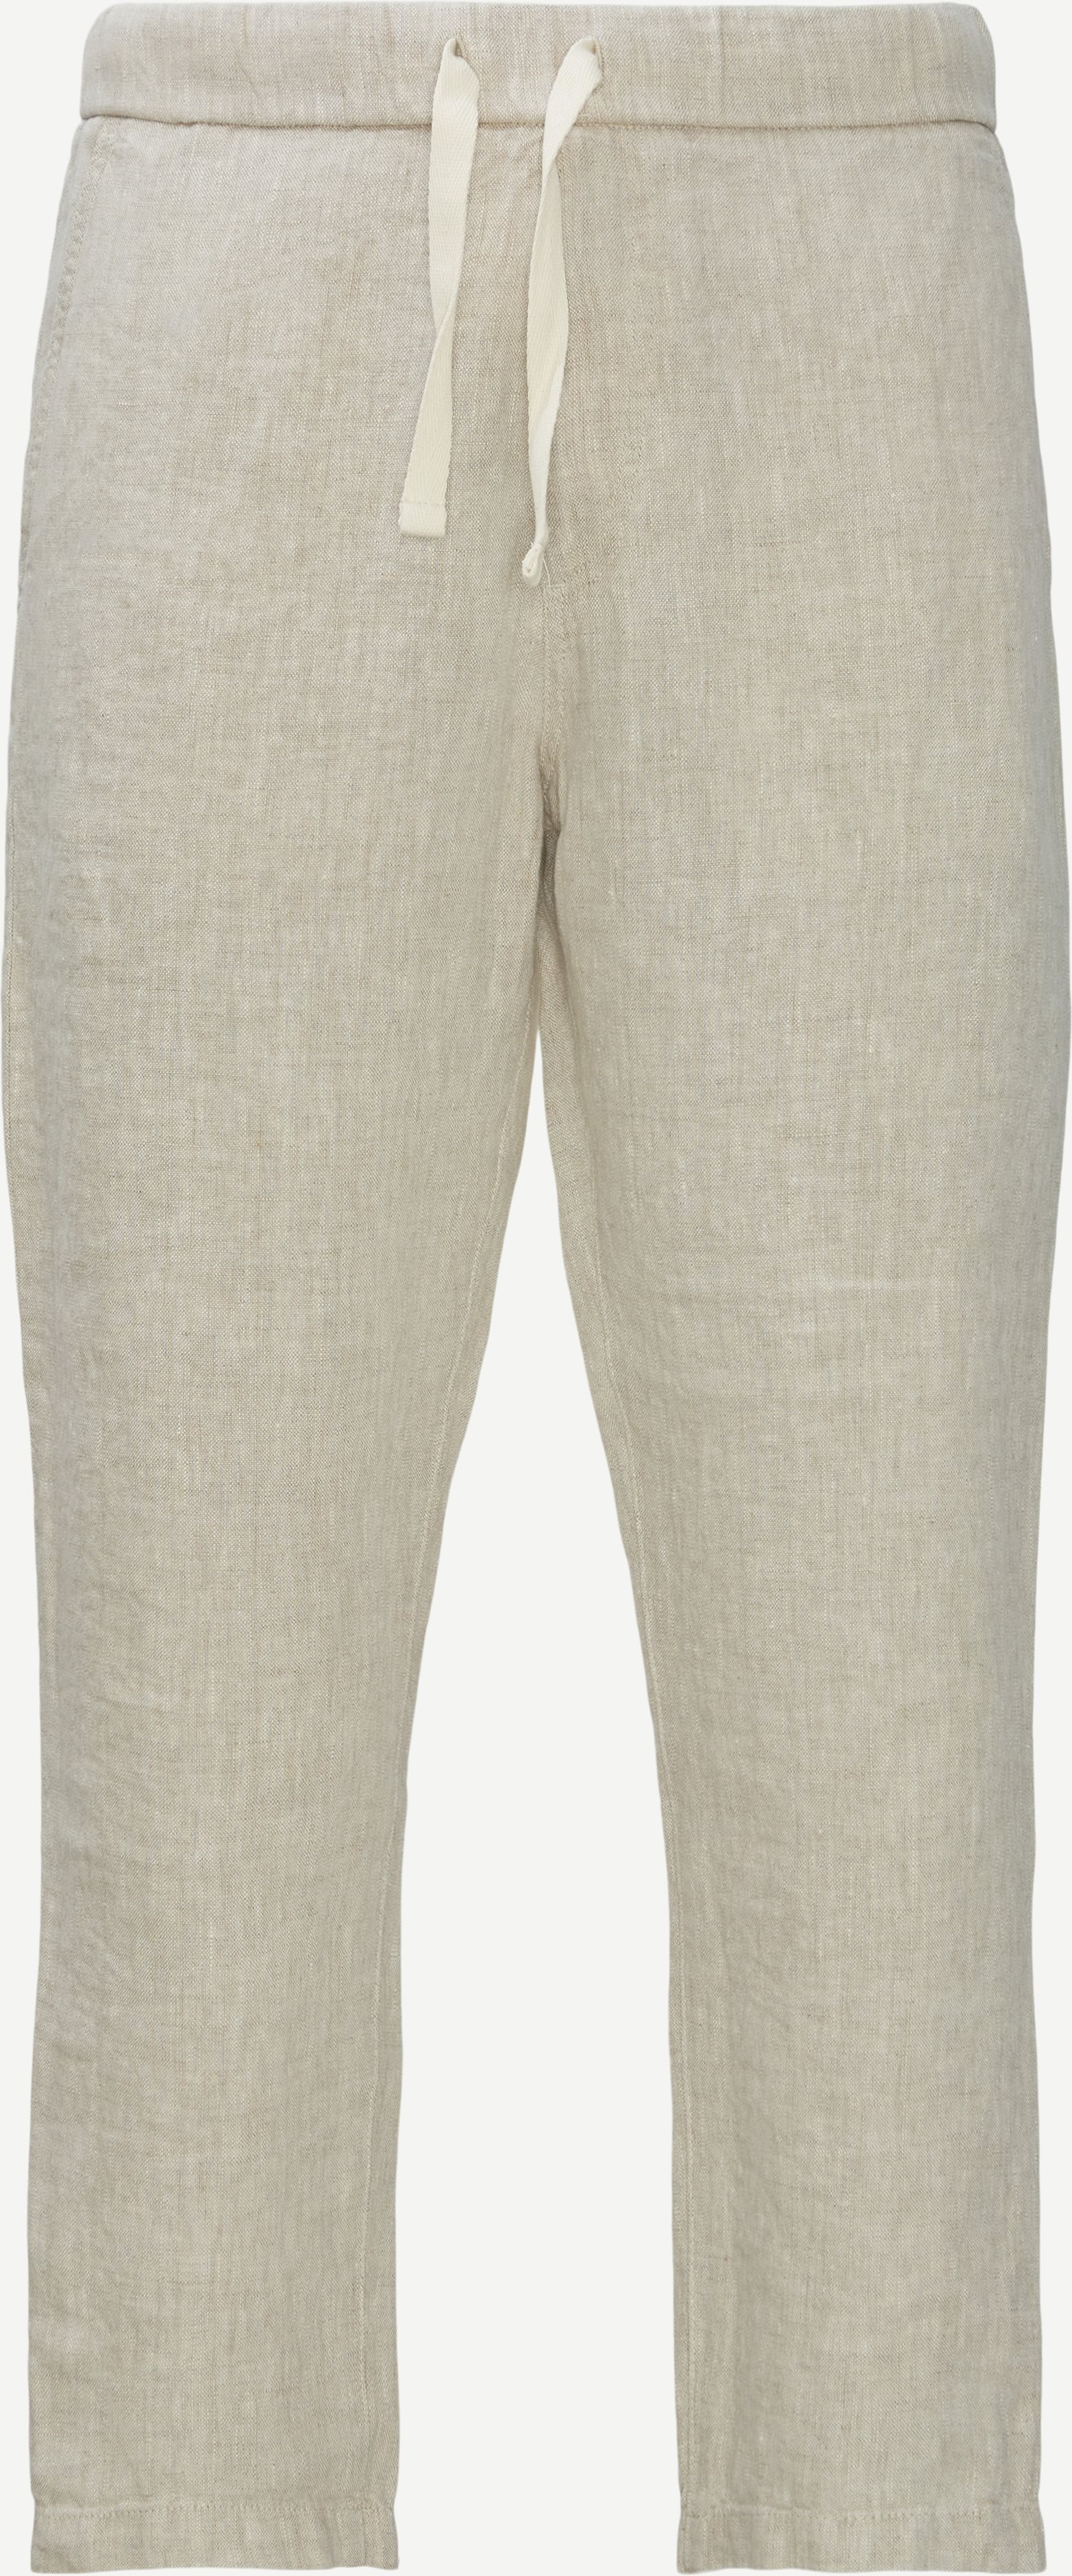 1196 Keith Hør Chinos - Bukser - Tapered fit - Sand